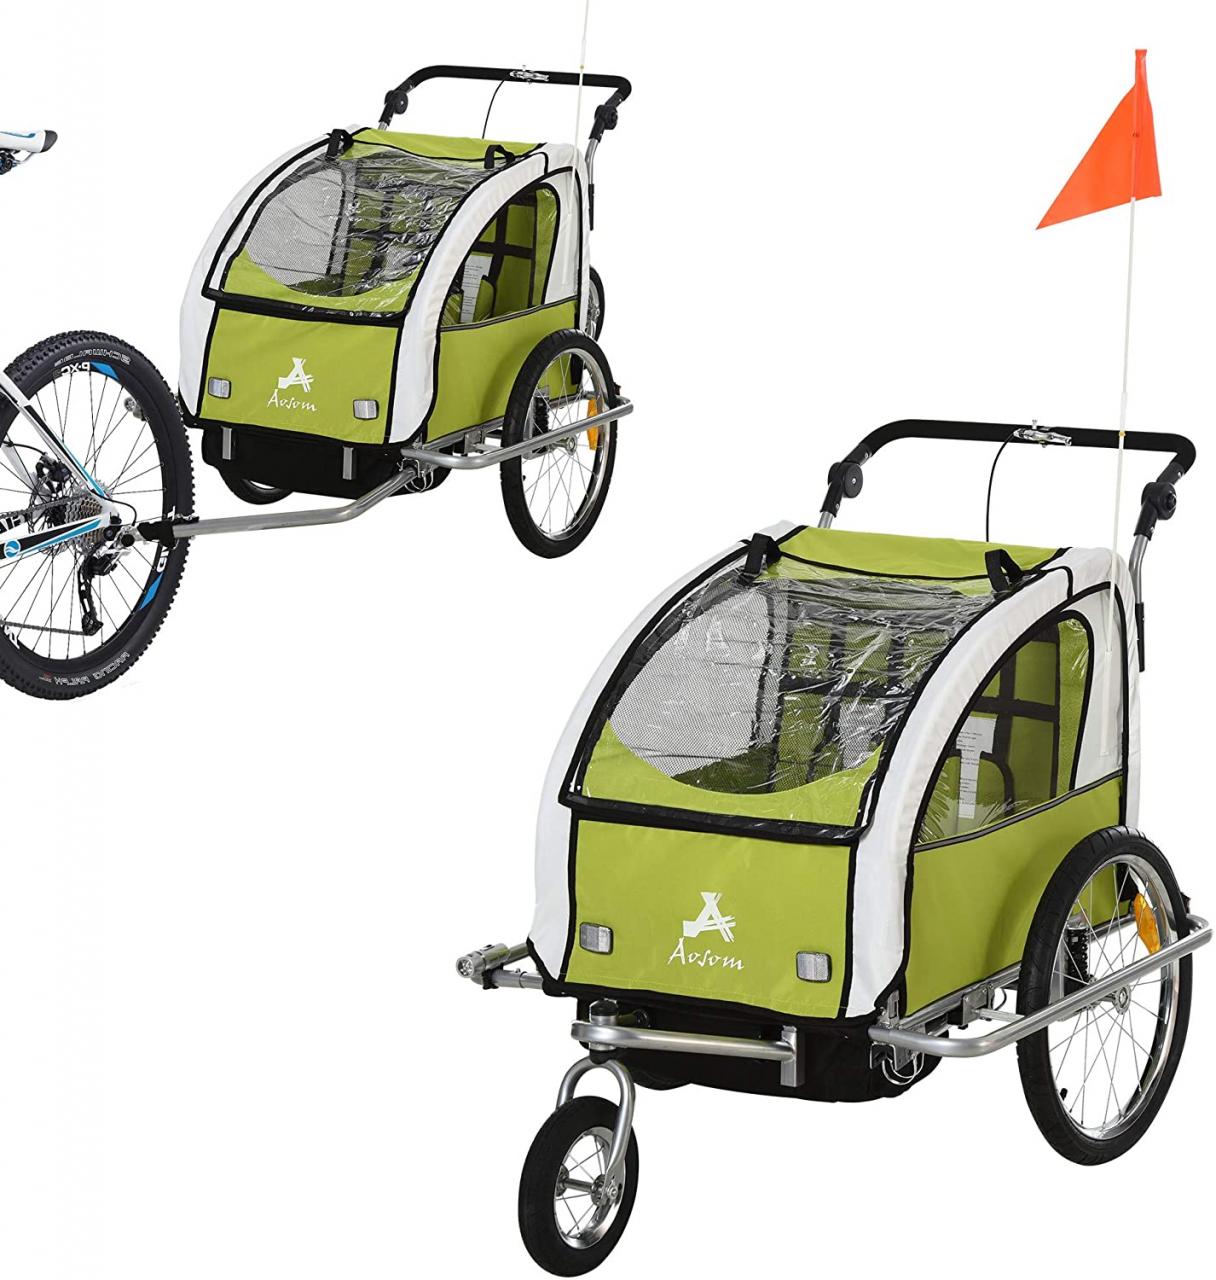 Aosom Elite 360 Swivel 2-in-1 Double Child Two-Wheel Bicycle Cargo Trailer  and Jogger with 2 Safety Harnesses (Green) : Amazon.co.uk: Sports & Outdoors